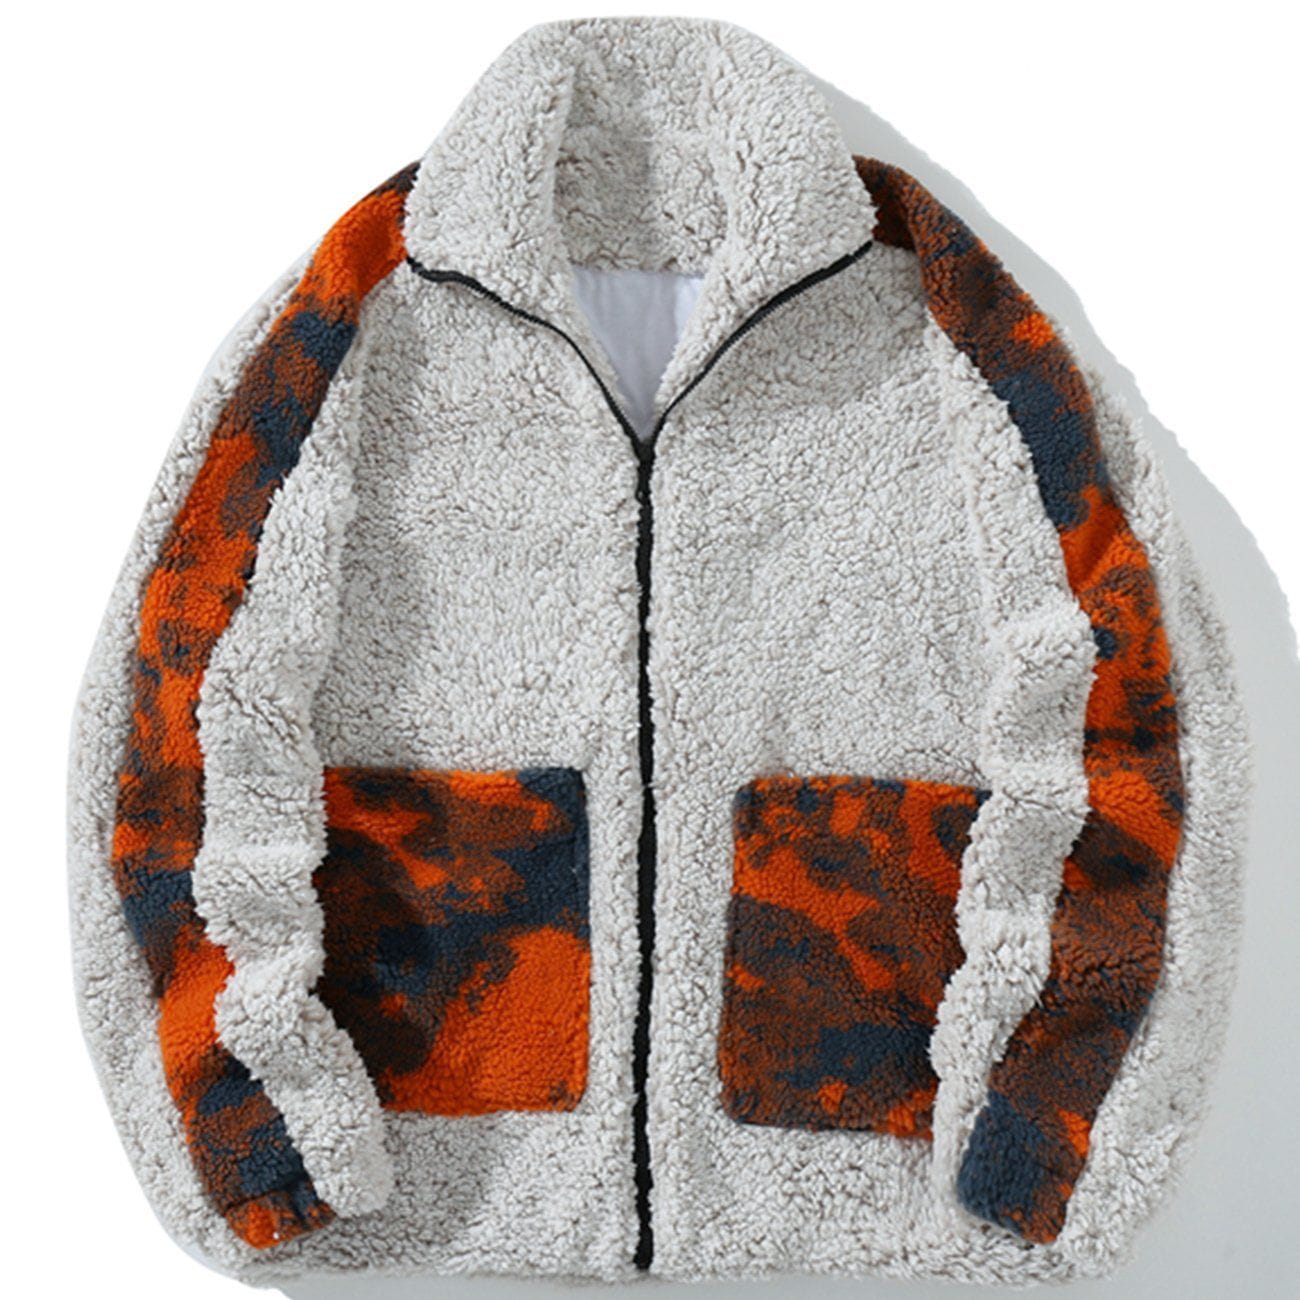 Majesda® - Patchwork Camouflage Sherpa Winter Coat outfit ideas streetwear fashion